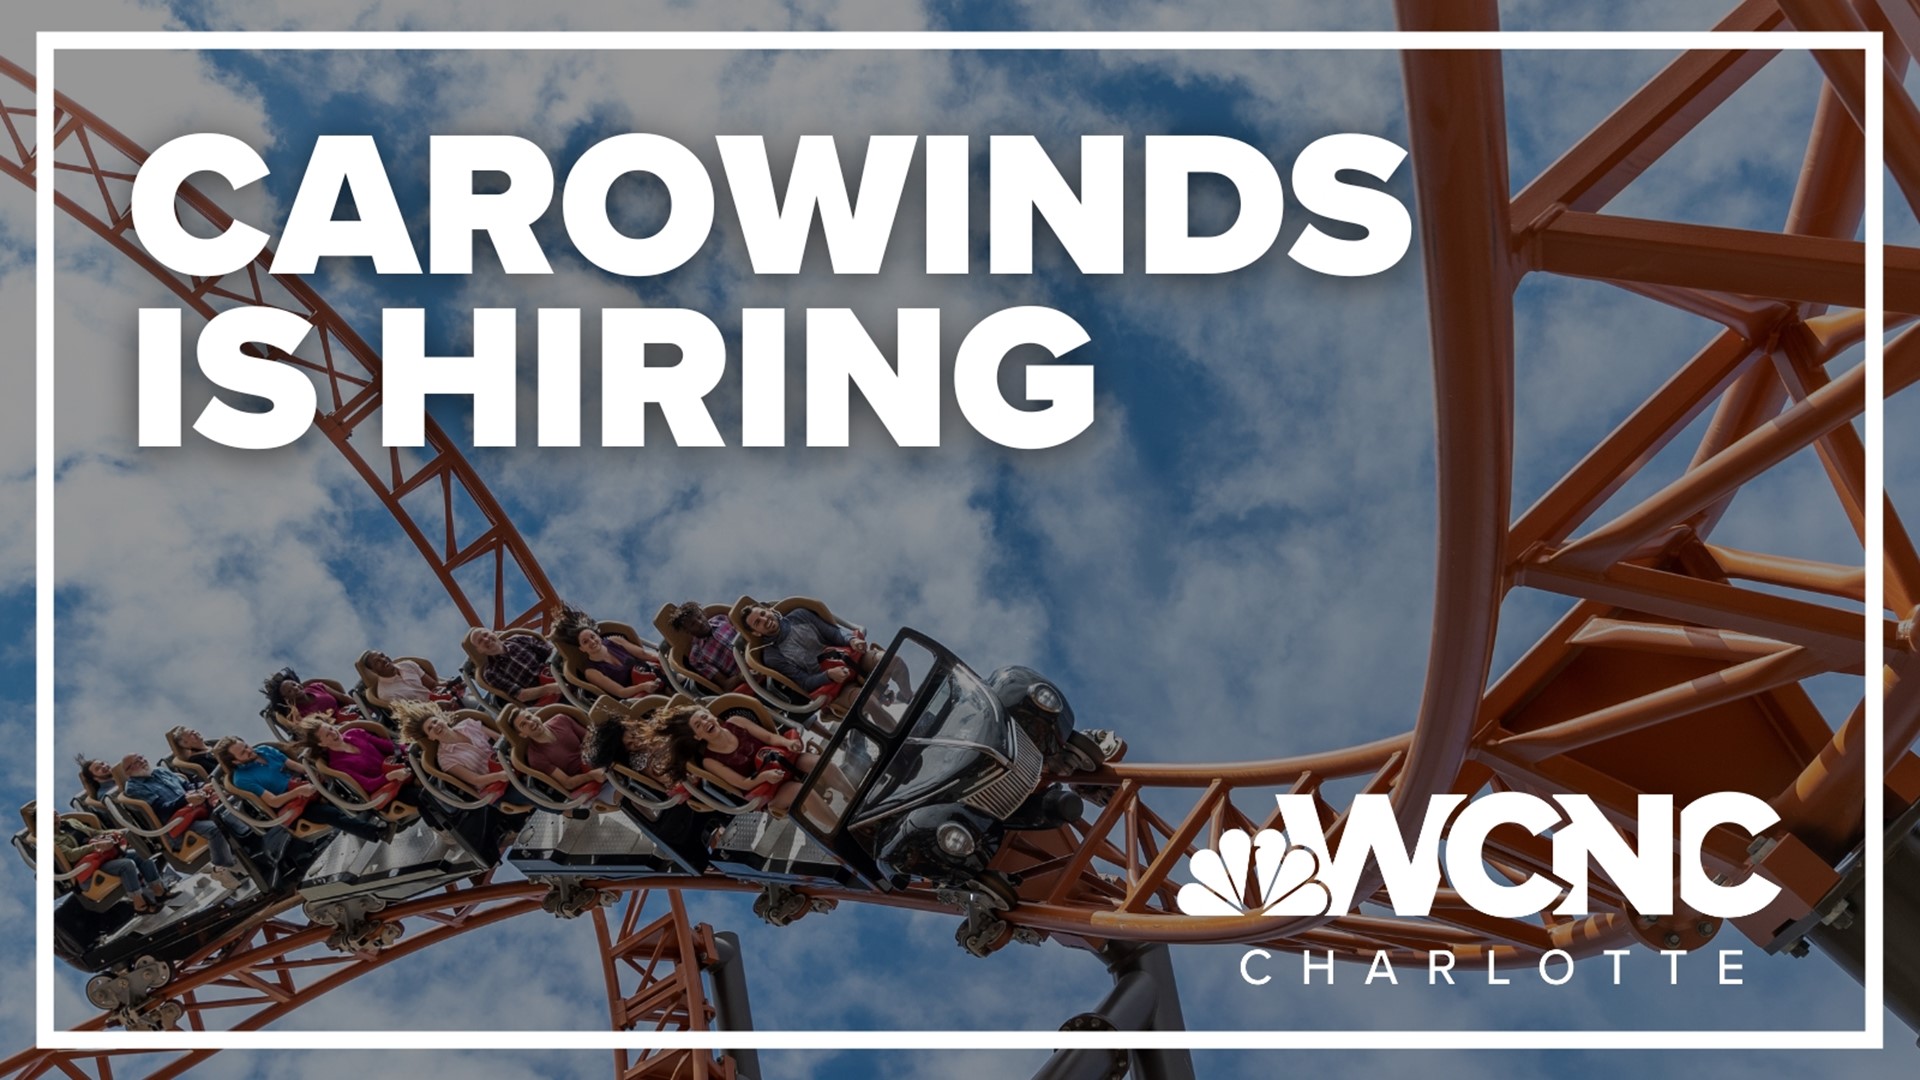 Carowinds announced Monday its plan to hire more than 2,400 seasonal associates as it prepares for a very special operating season.